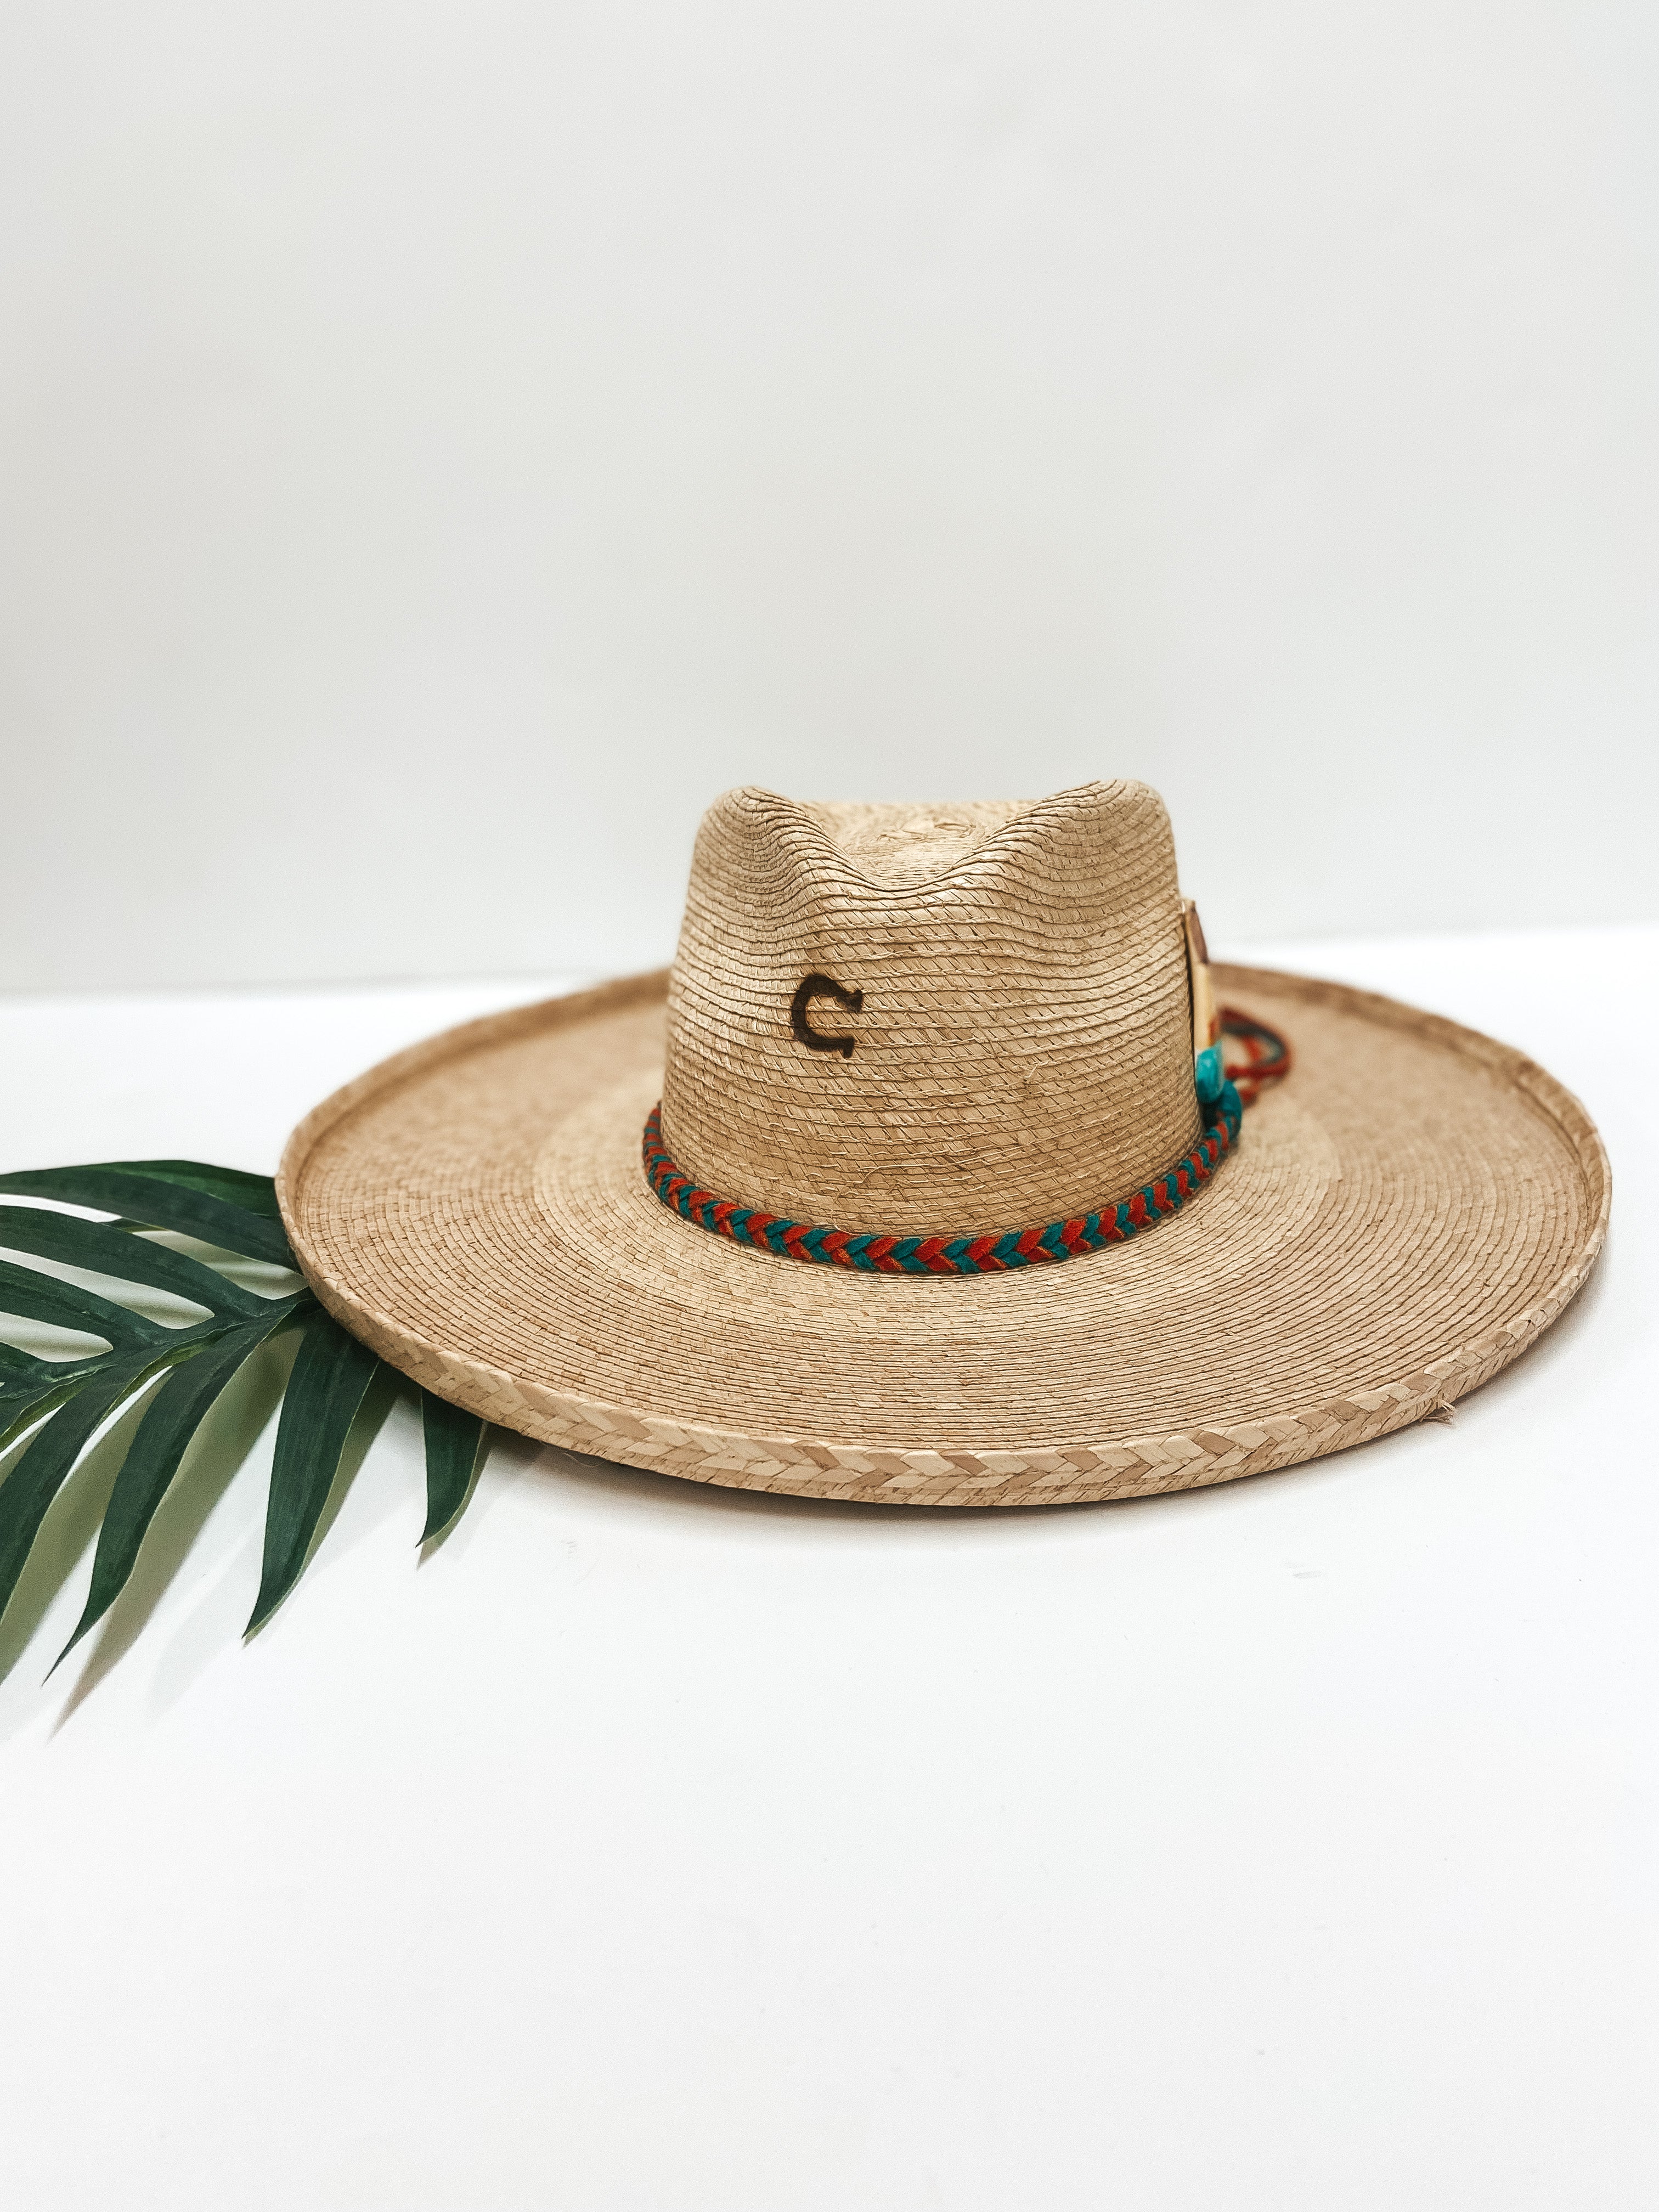 Charlie 1 Horse | Teepee Creepin' Palm Leaf Hat with Leather Braided Band and Teepee Concho - Giddy Up Glamour Boutique